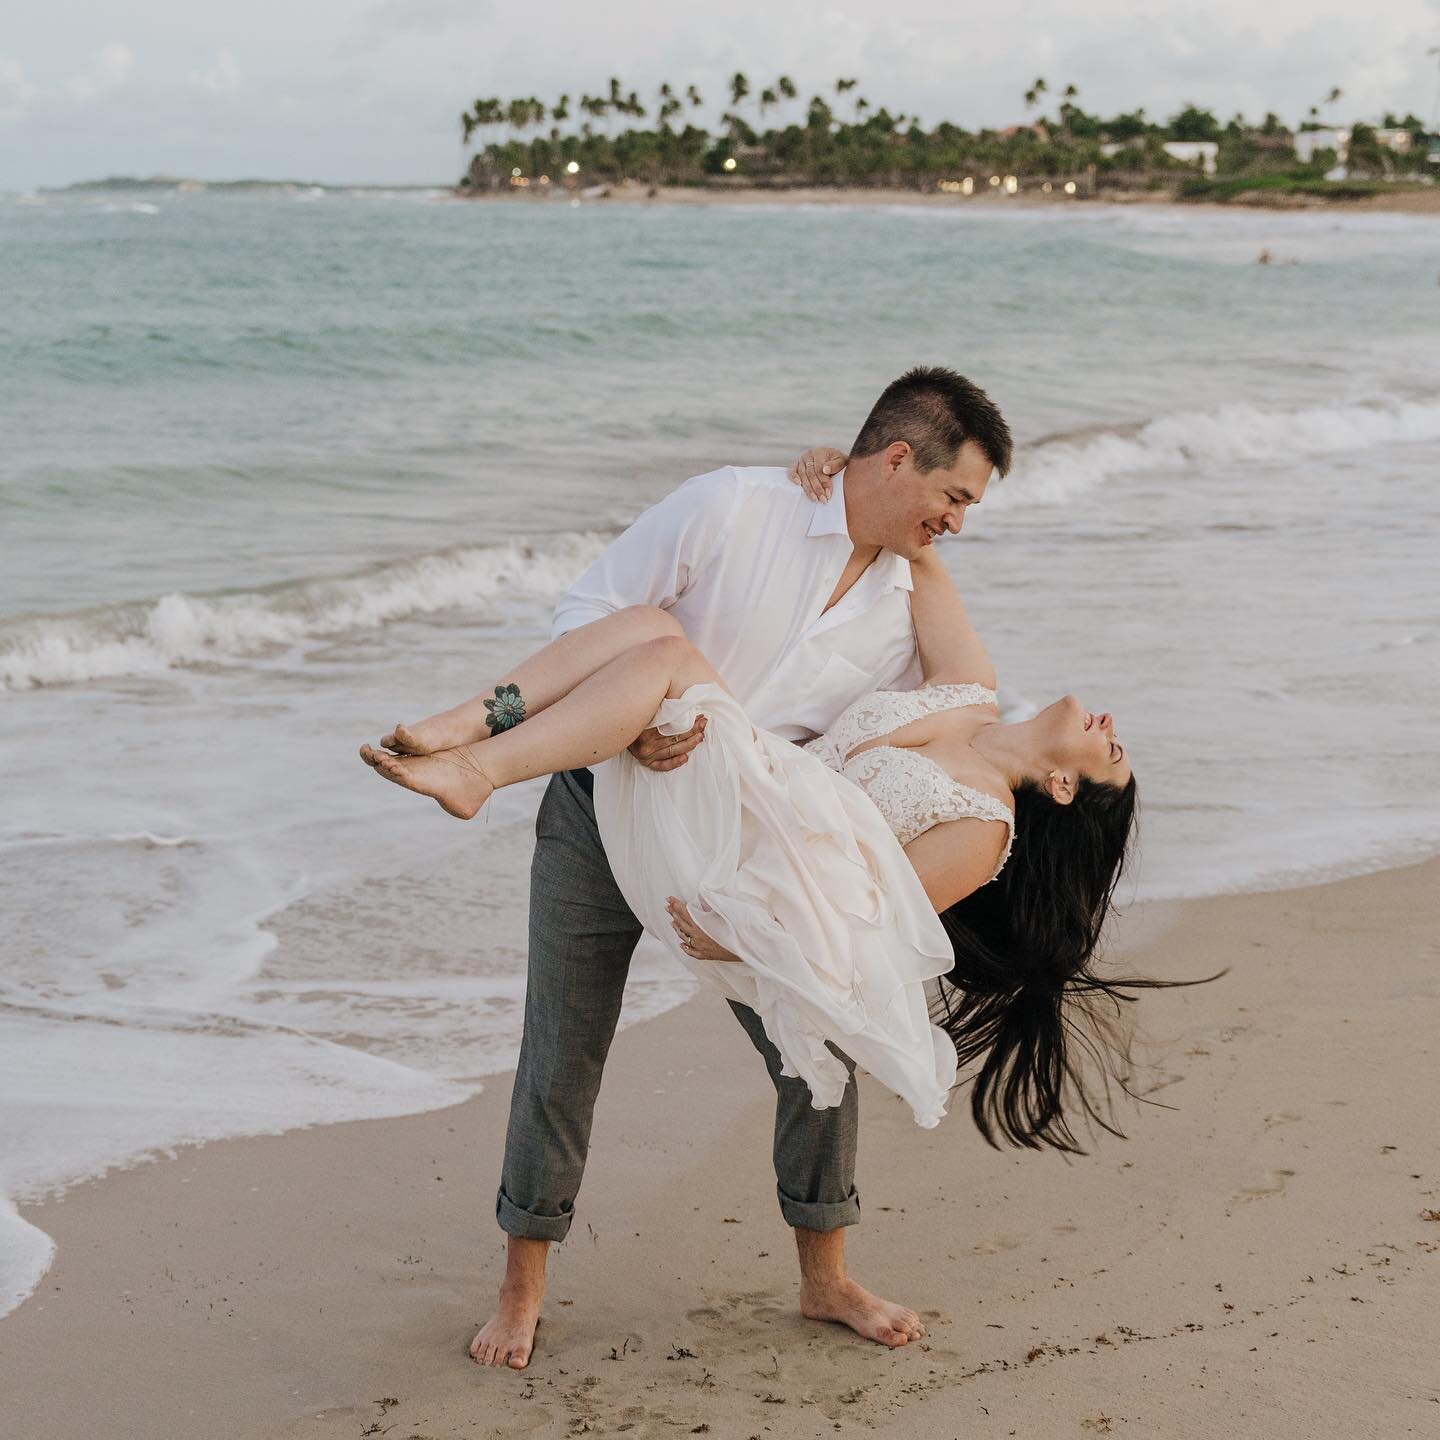 Raechel &amp; Mike got married, barefoot on the beach, on the most perfect day in Punta Cana in the Dominican Republic surrounded by so many dear loved ones.
.
To say it was perfect wonderful would be to say that the ocean has waves. It was fun and f